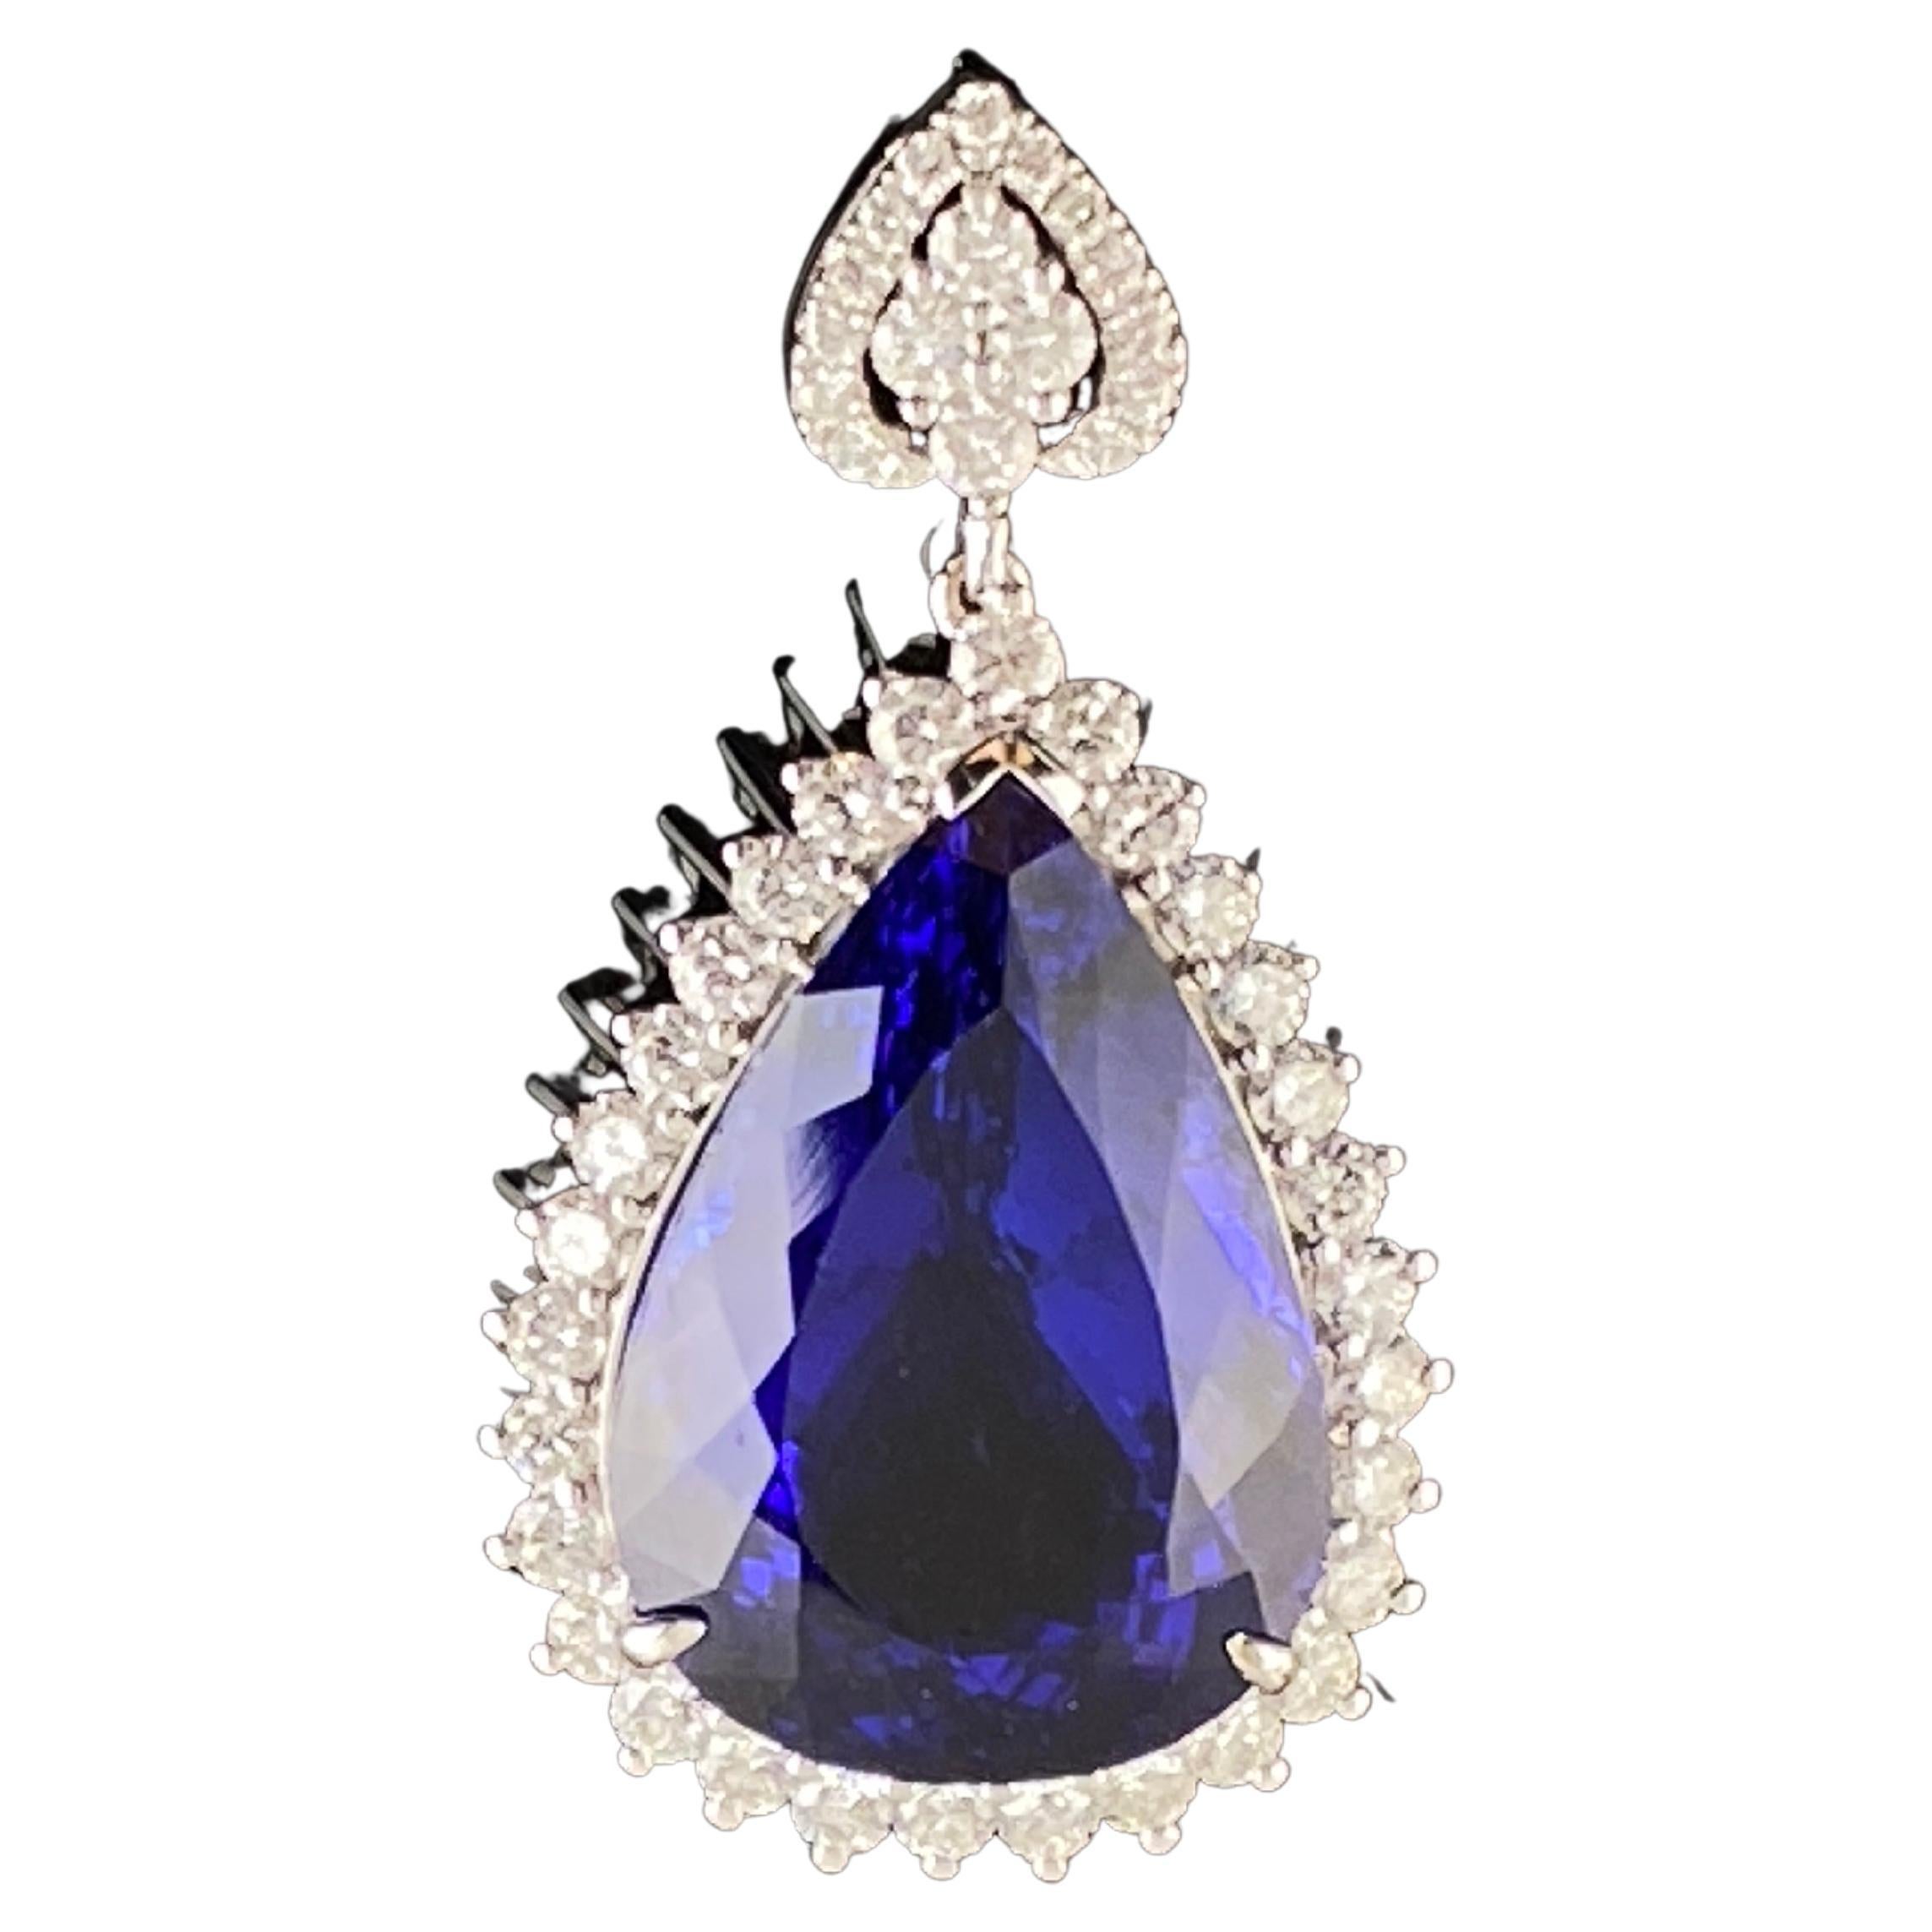 Natural 18K White Gold 44.7 Carat Tanzanite Pendent Necklace with Cert, Rare For Sale